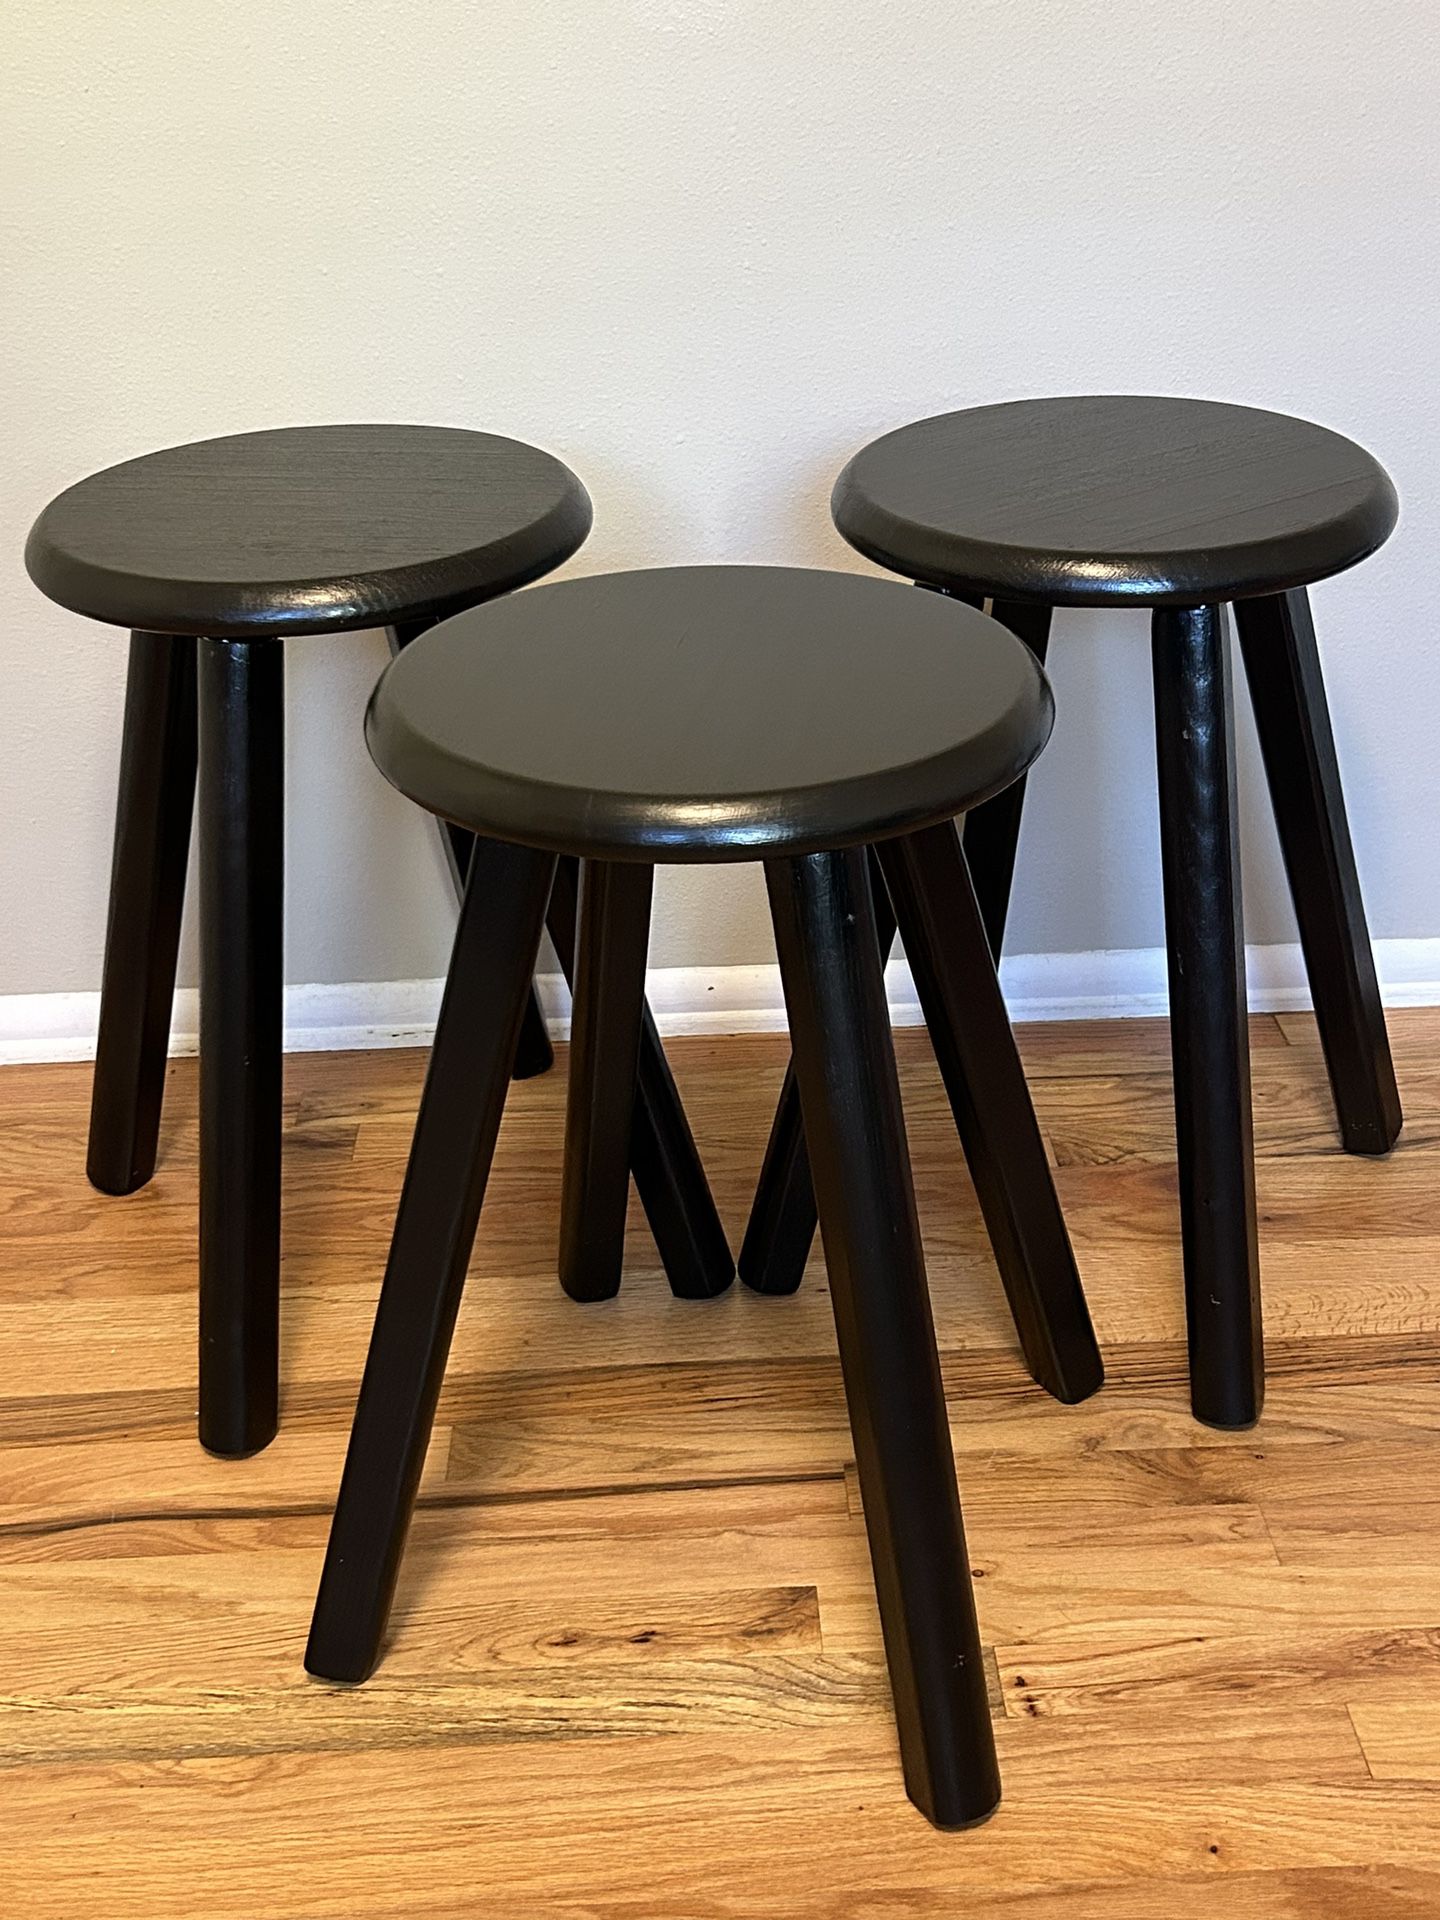 Set of 3 All-Wood Stools in Black